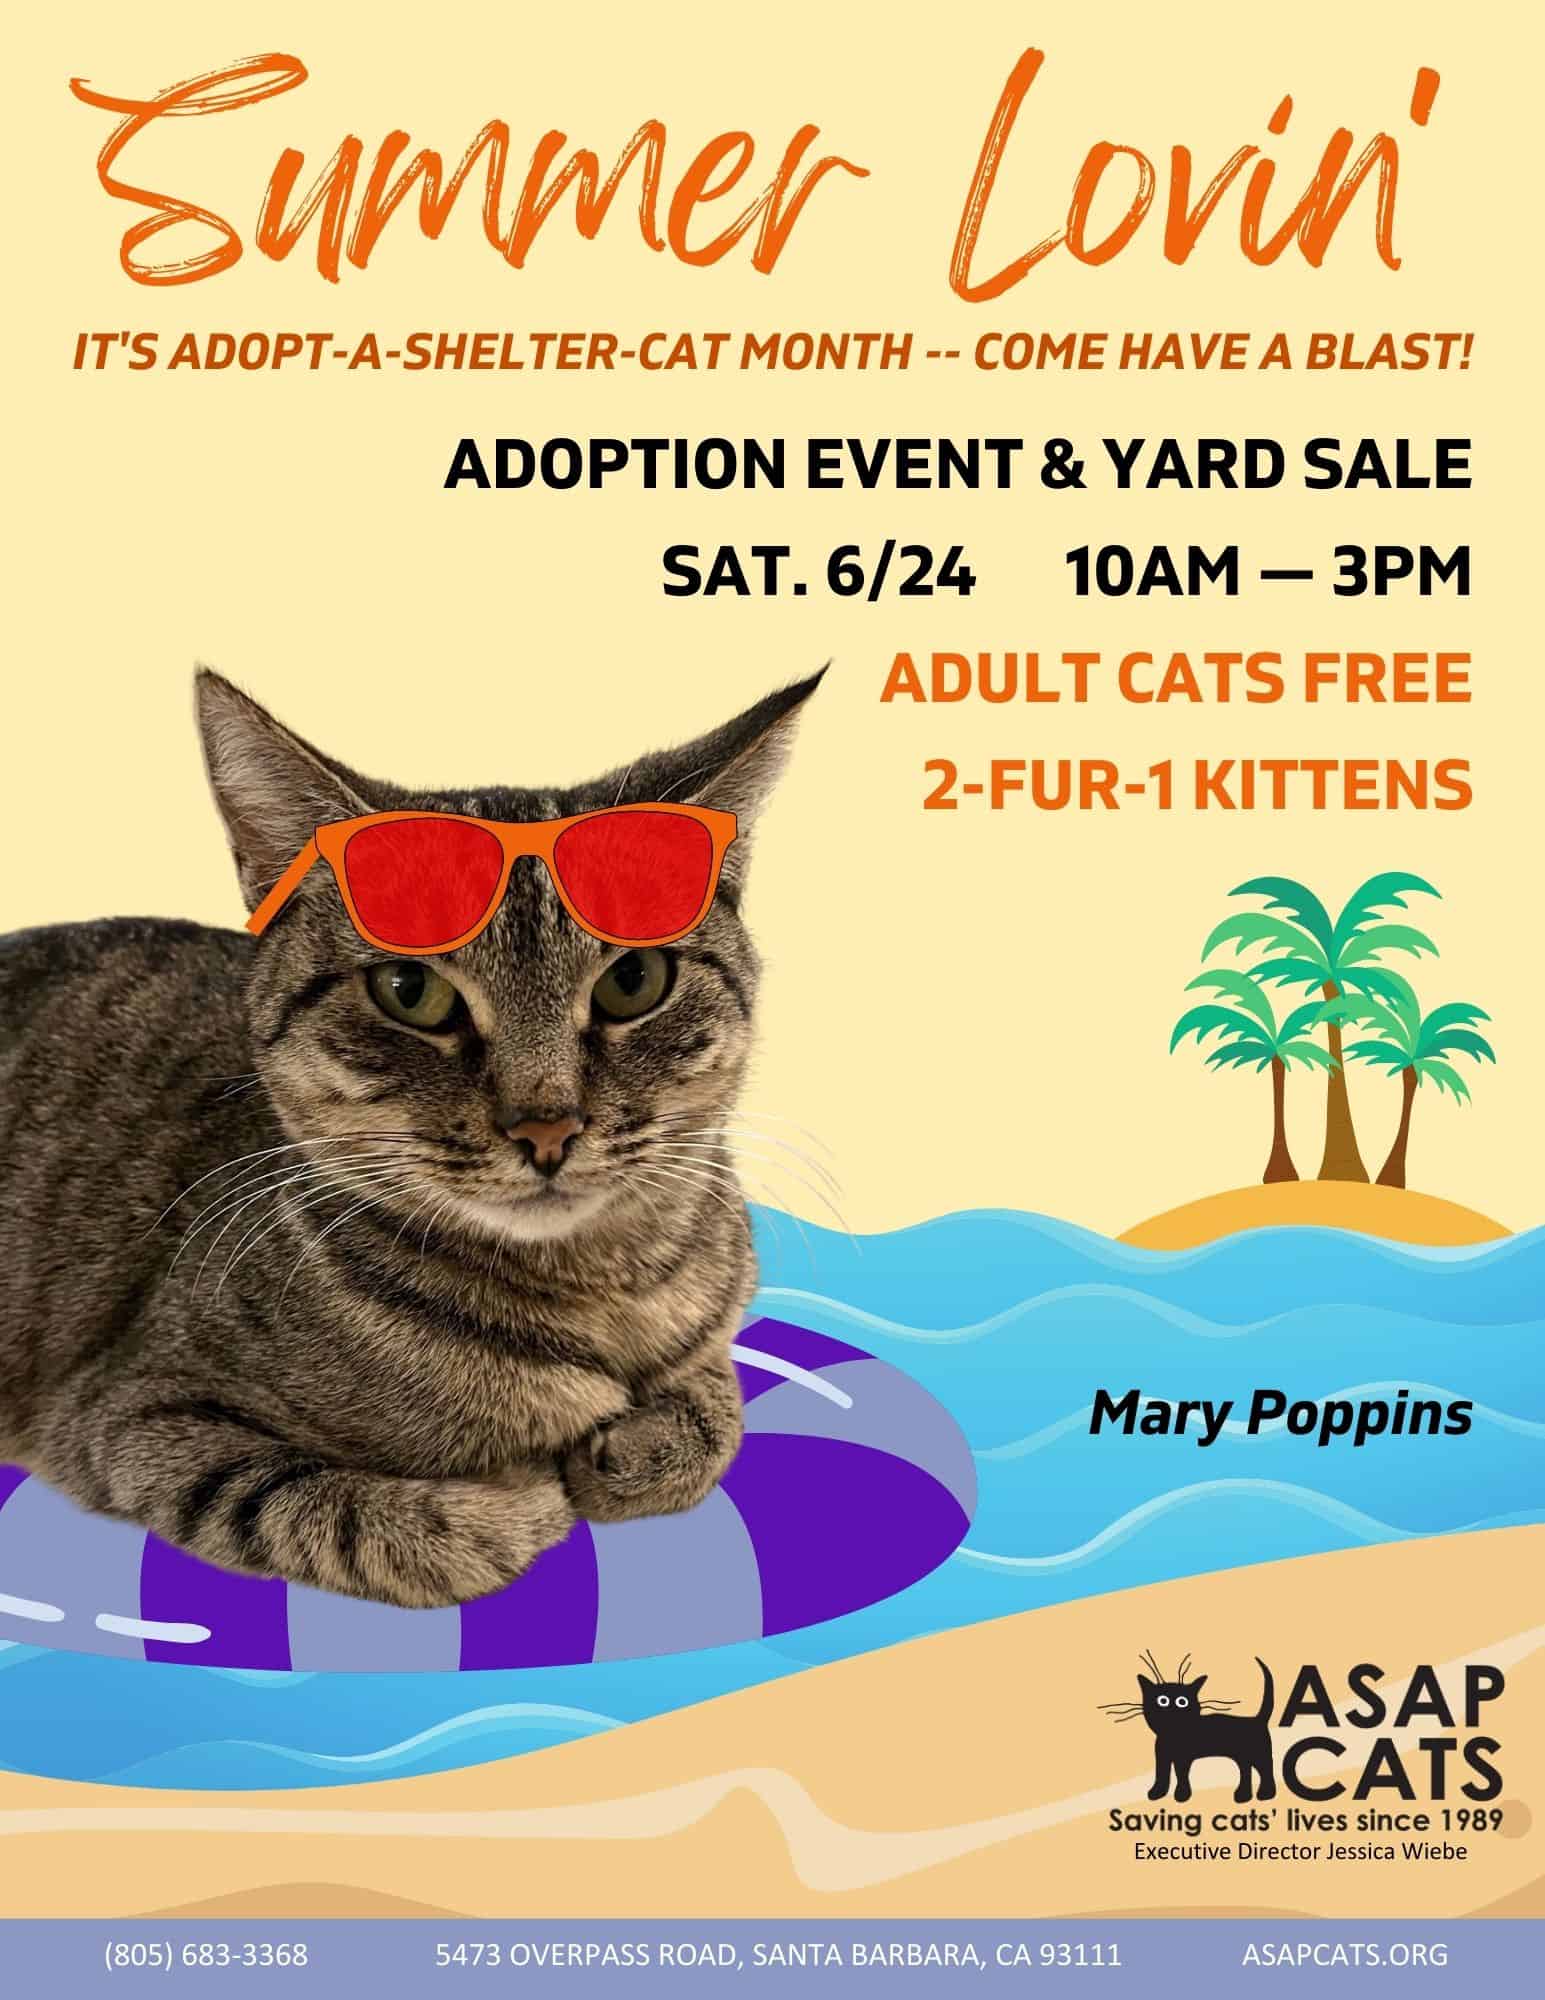 June Adoption Event Poster ASAP Cats Saturday June 24th 10am to 3pm Adult Cats Free 2 for 1 Kittens